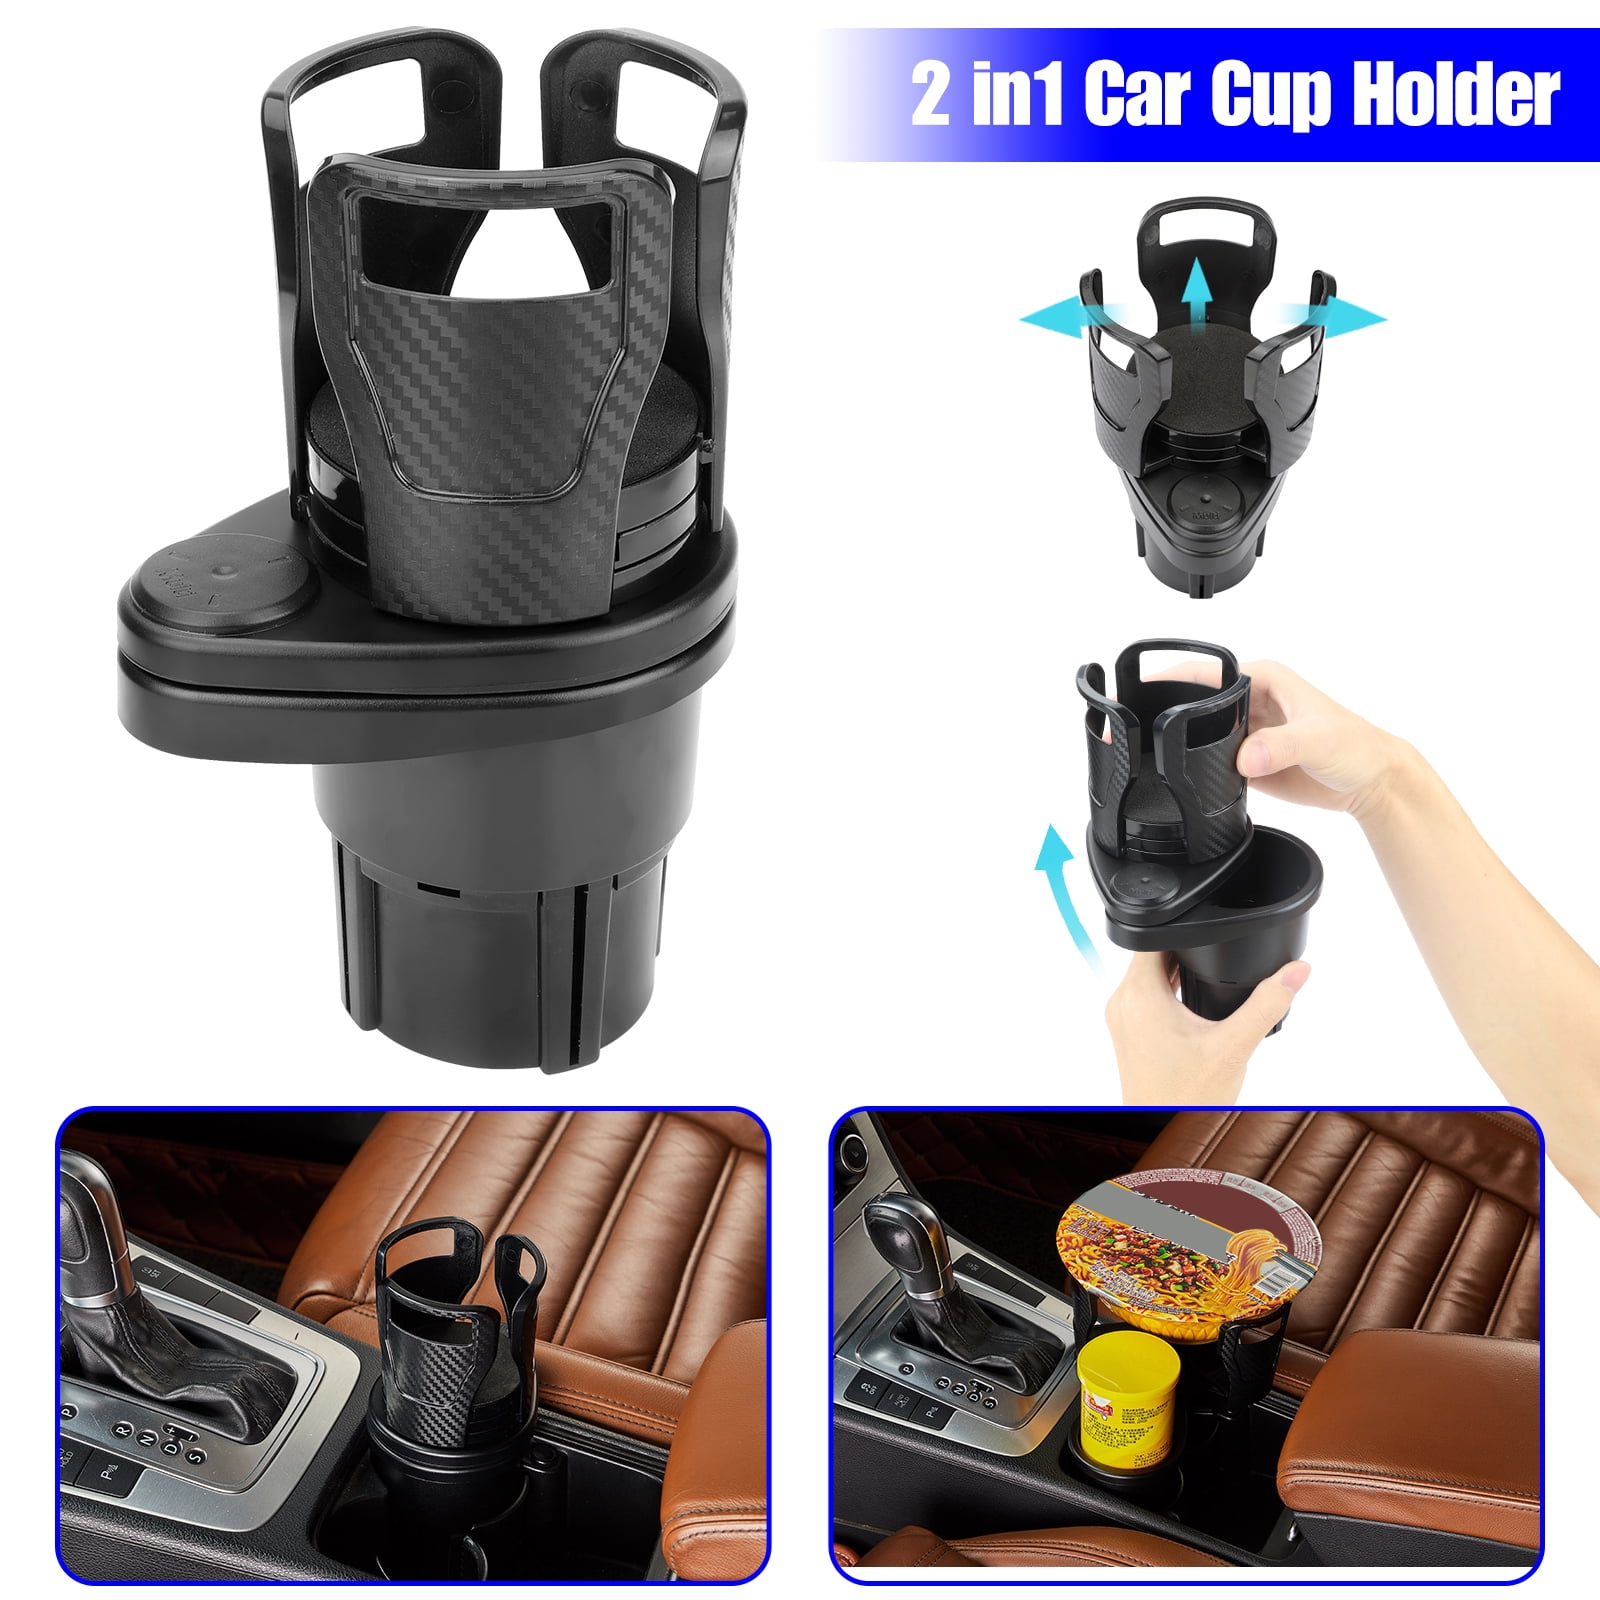 Multifunctional Bottle Holder Extender for Coffee & Drinks Or Movable Detachable Base 2 in 1 Cup Adapter Organizer Stand with an Expandable Bracket for A Snug Fit lebogner Car Cup Holder Expander